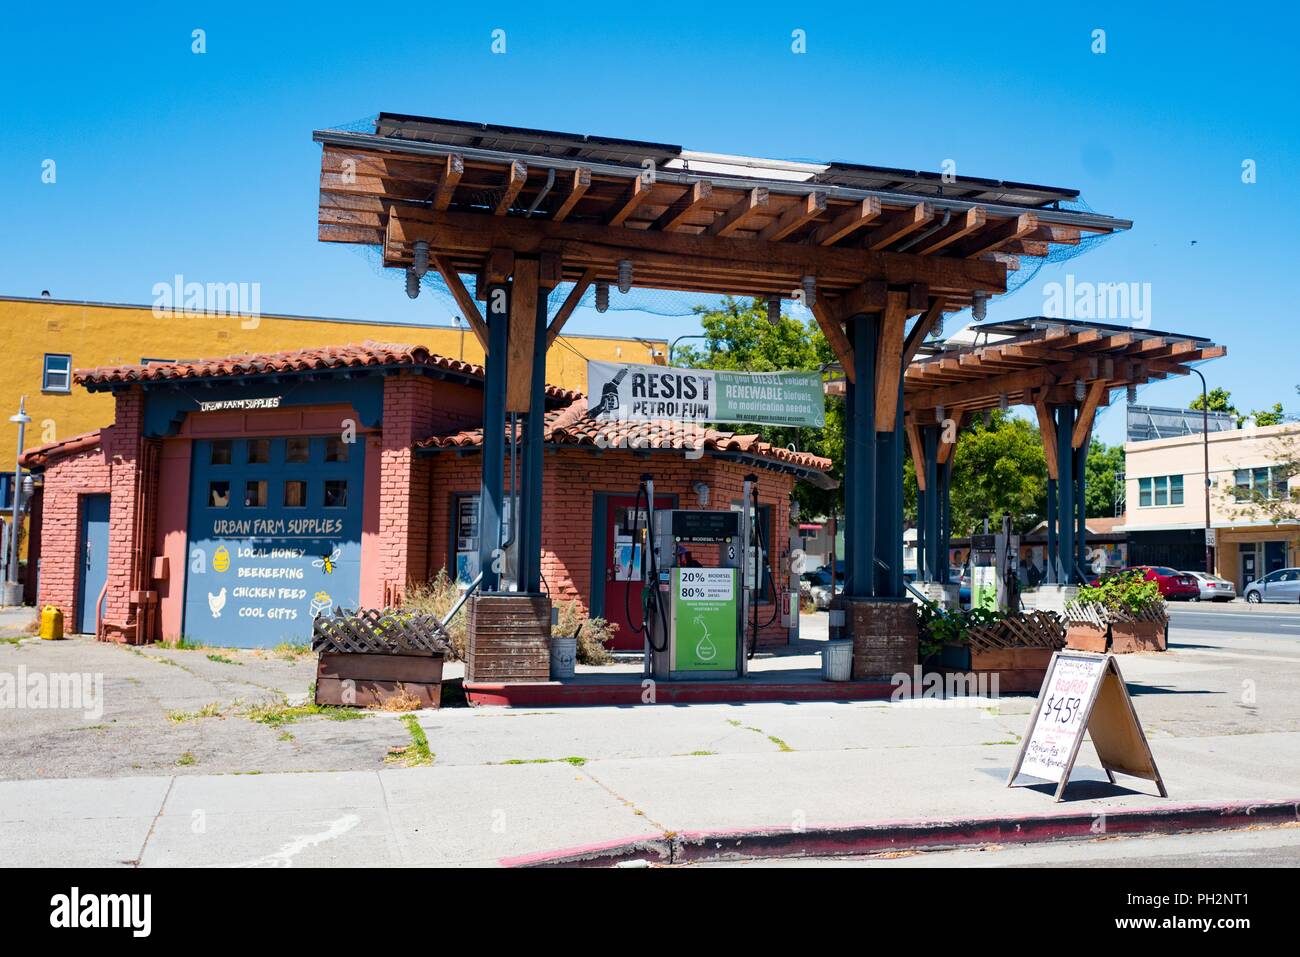 Facade of BiofuelOasis, a worker-owned cooperative gas station and supply store in downtown Berkeley, California, with gas pump providing locally-made biodiesel fuel and sign reading Resist Petroleum, June 12, 2018. () Stock Photo